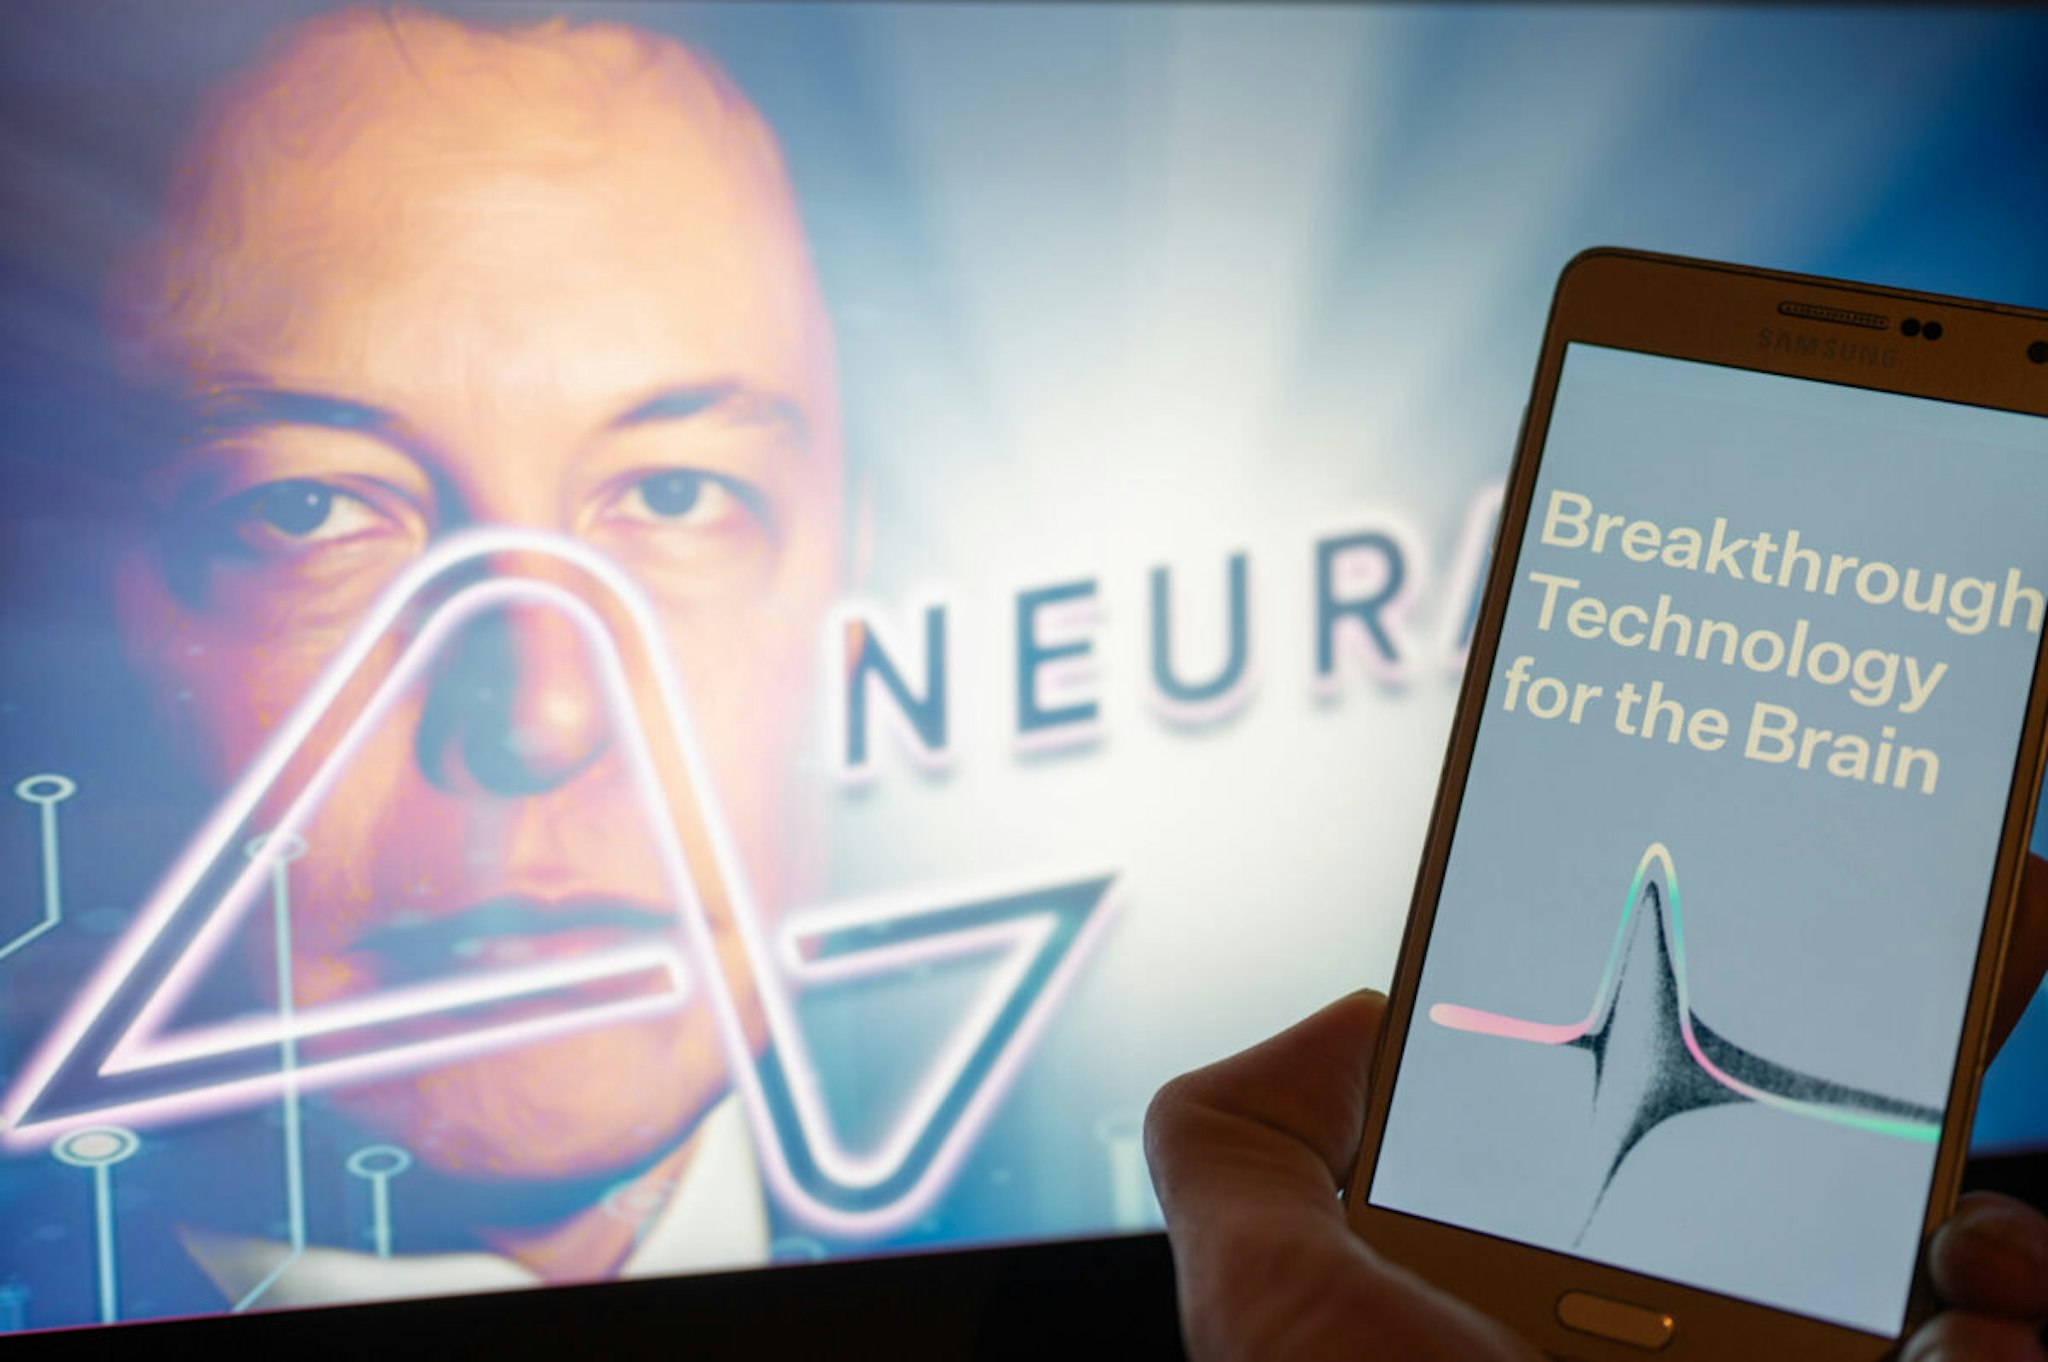 Neuralink logo displayed on mobil with founder Elon Musk seen on screen in the background. Neuralink Corporation is a neurotechnology company that develops implantable brain-computer interfaces. In Brussels on 4 December 2022.